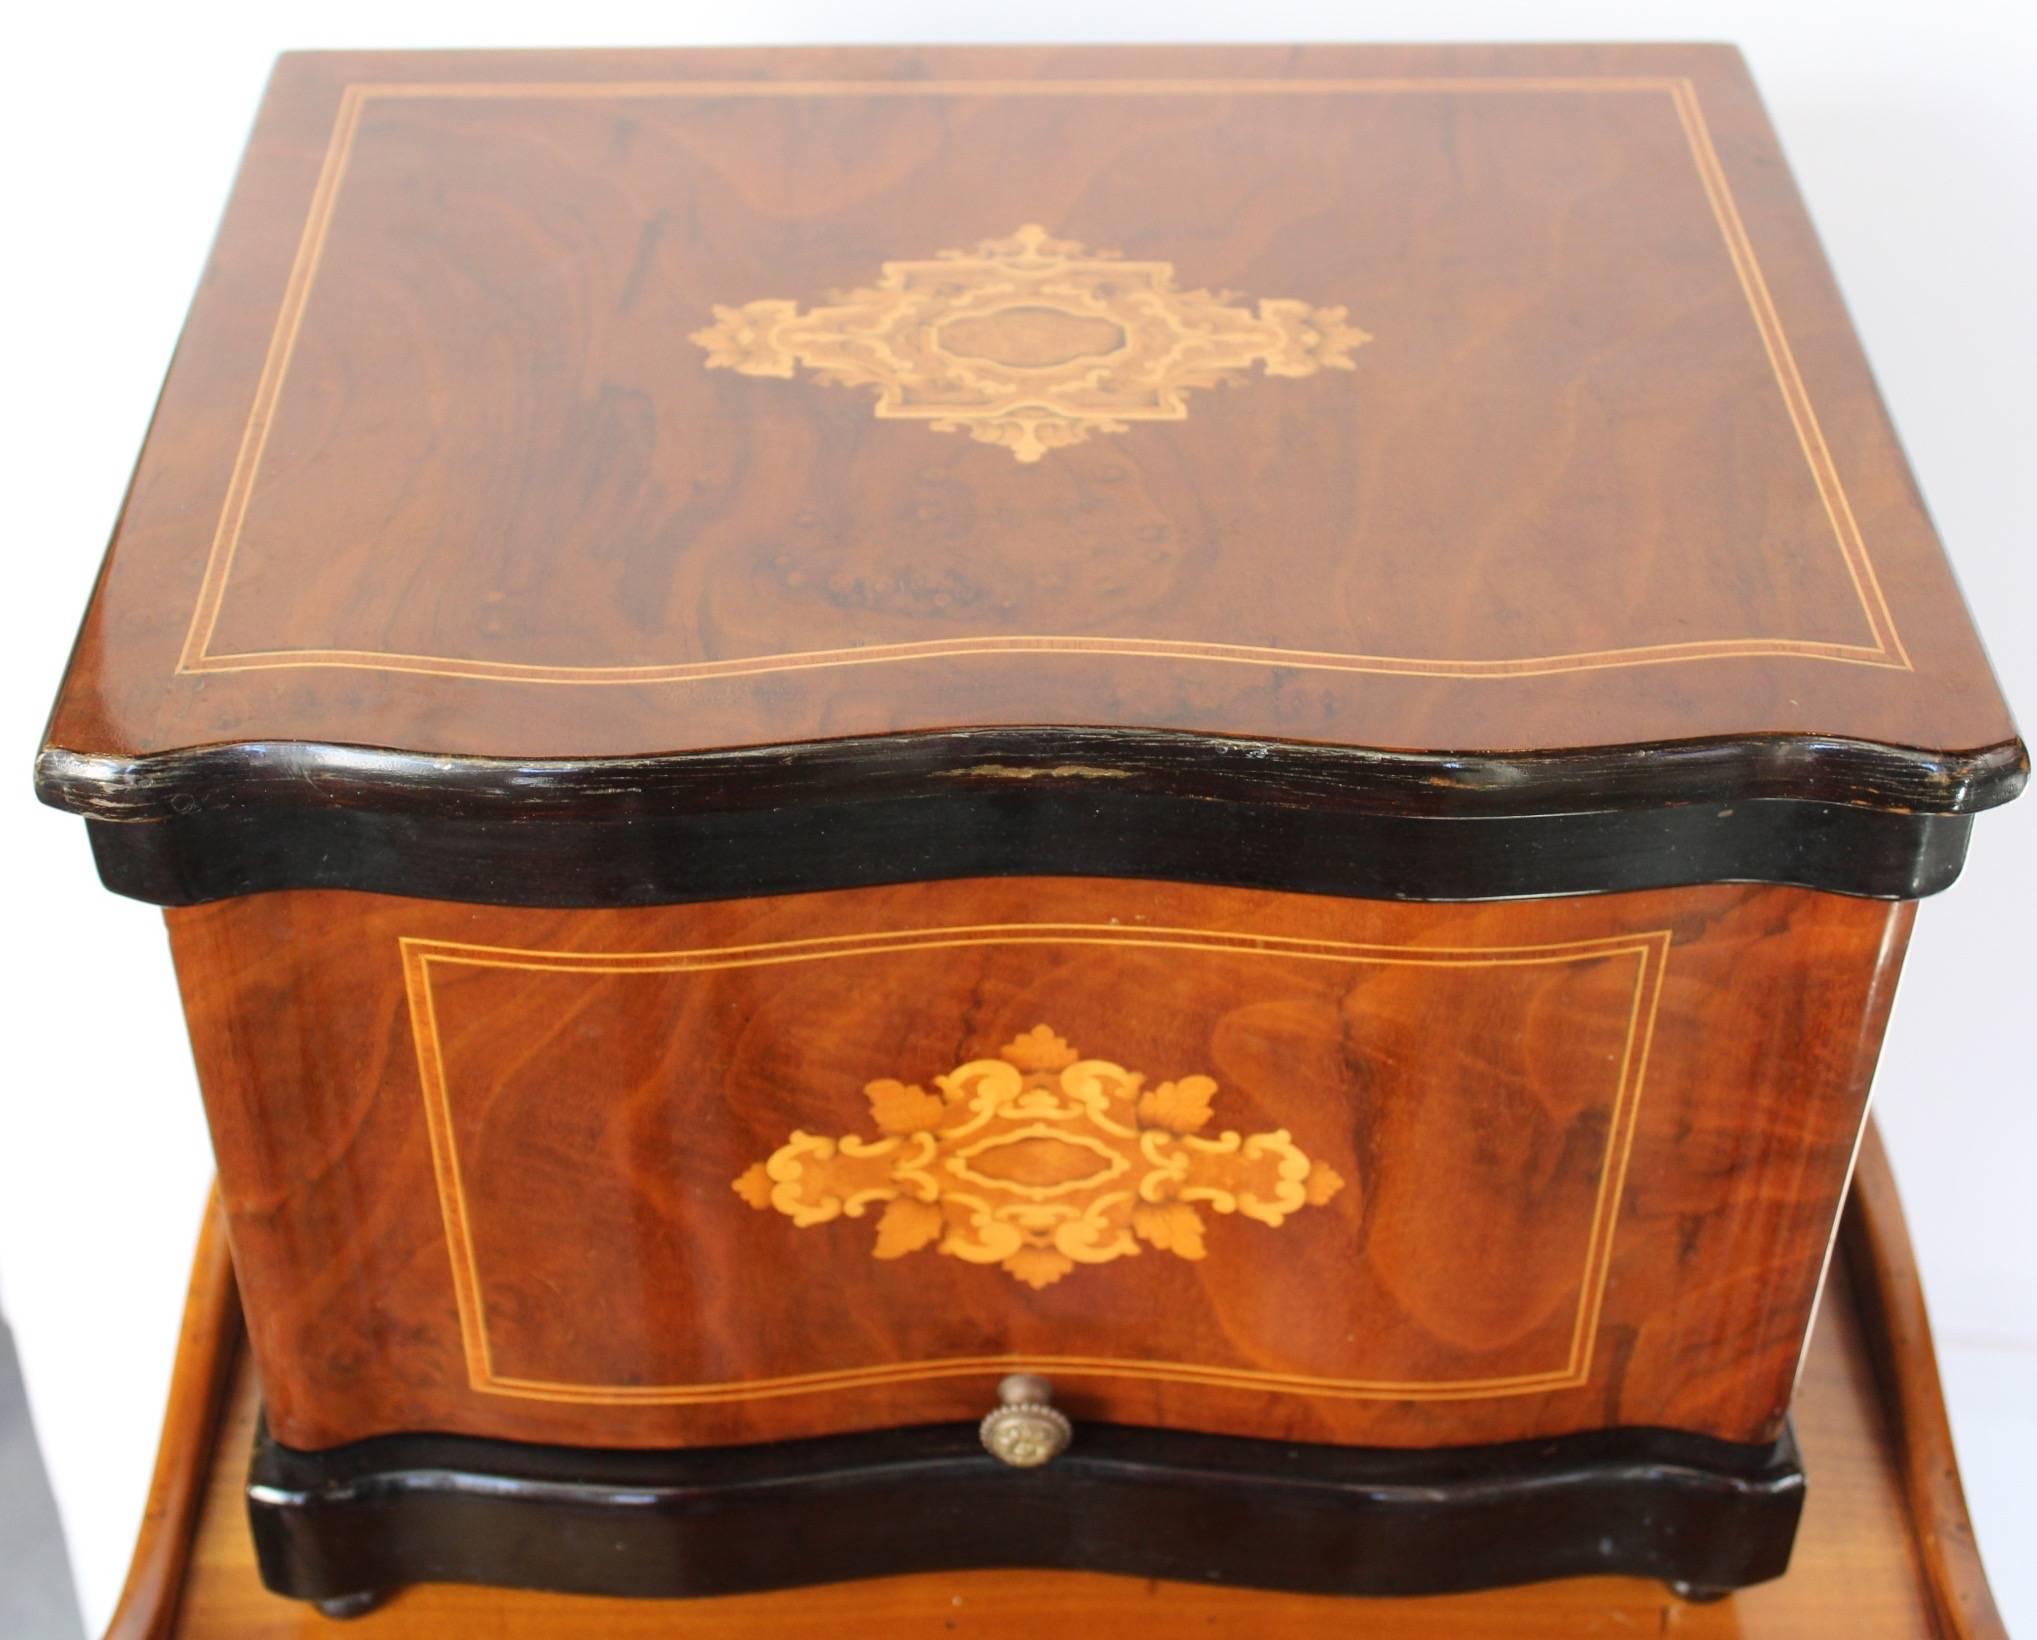 Fine Napoleon III period  Cave a Liqueurs. Case of mahogany veneer with a marquetry of Blonde wood on top and in front and an ebonized wood band top and bottom.The lid lifts upward ,allowing the sides to open for an easy access and revealing a two